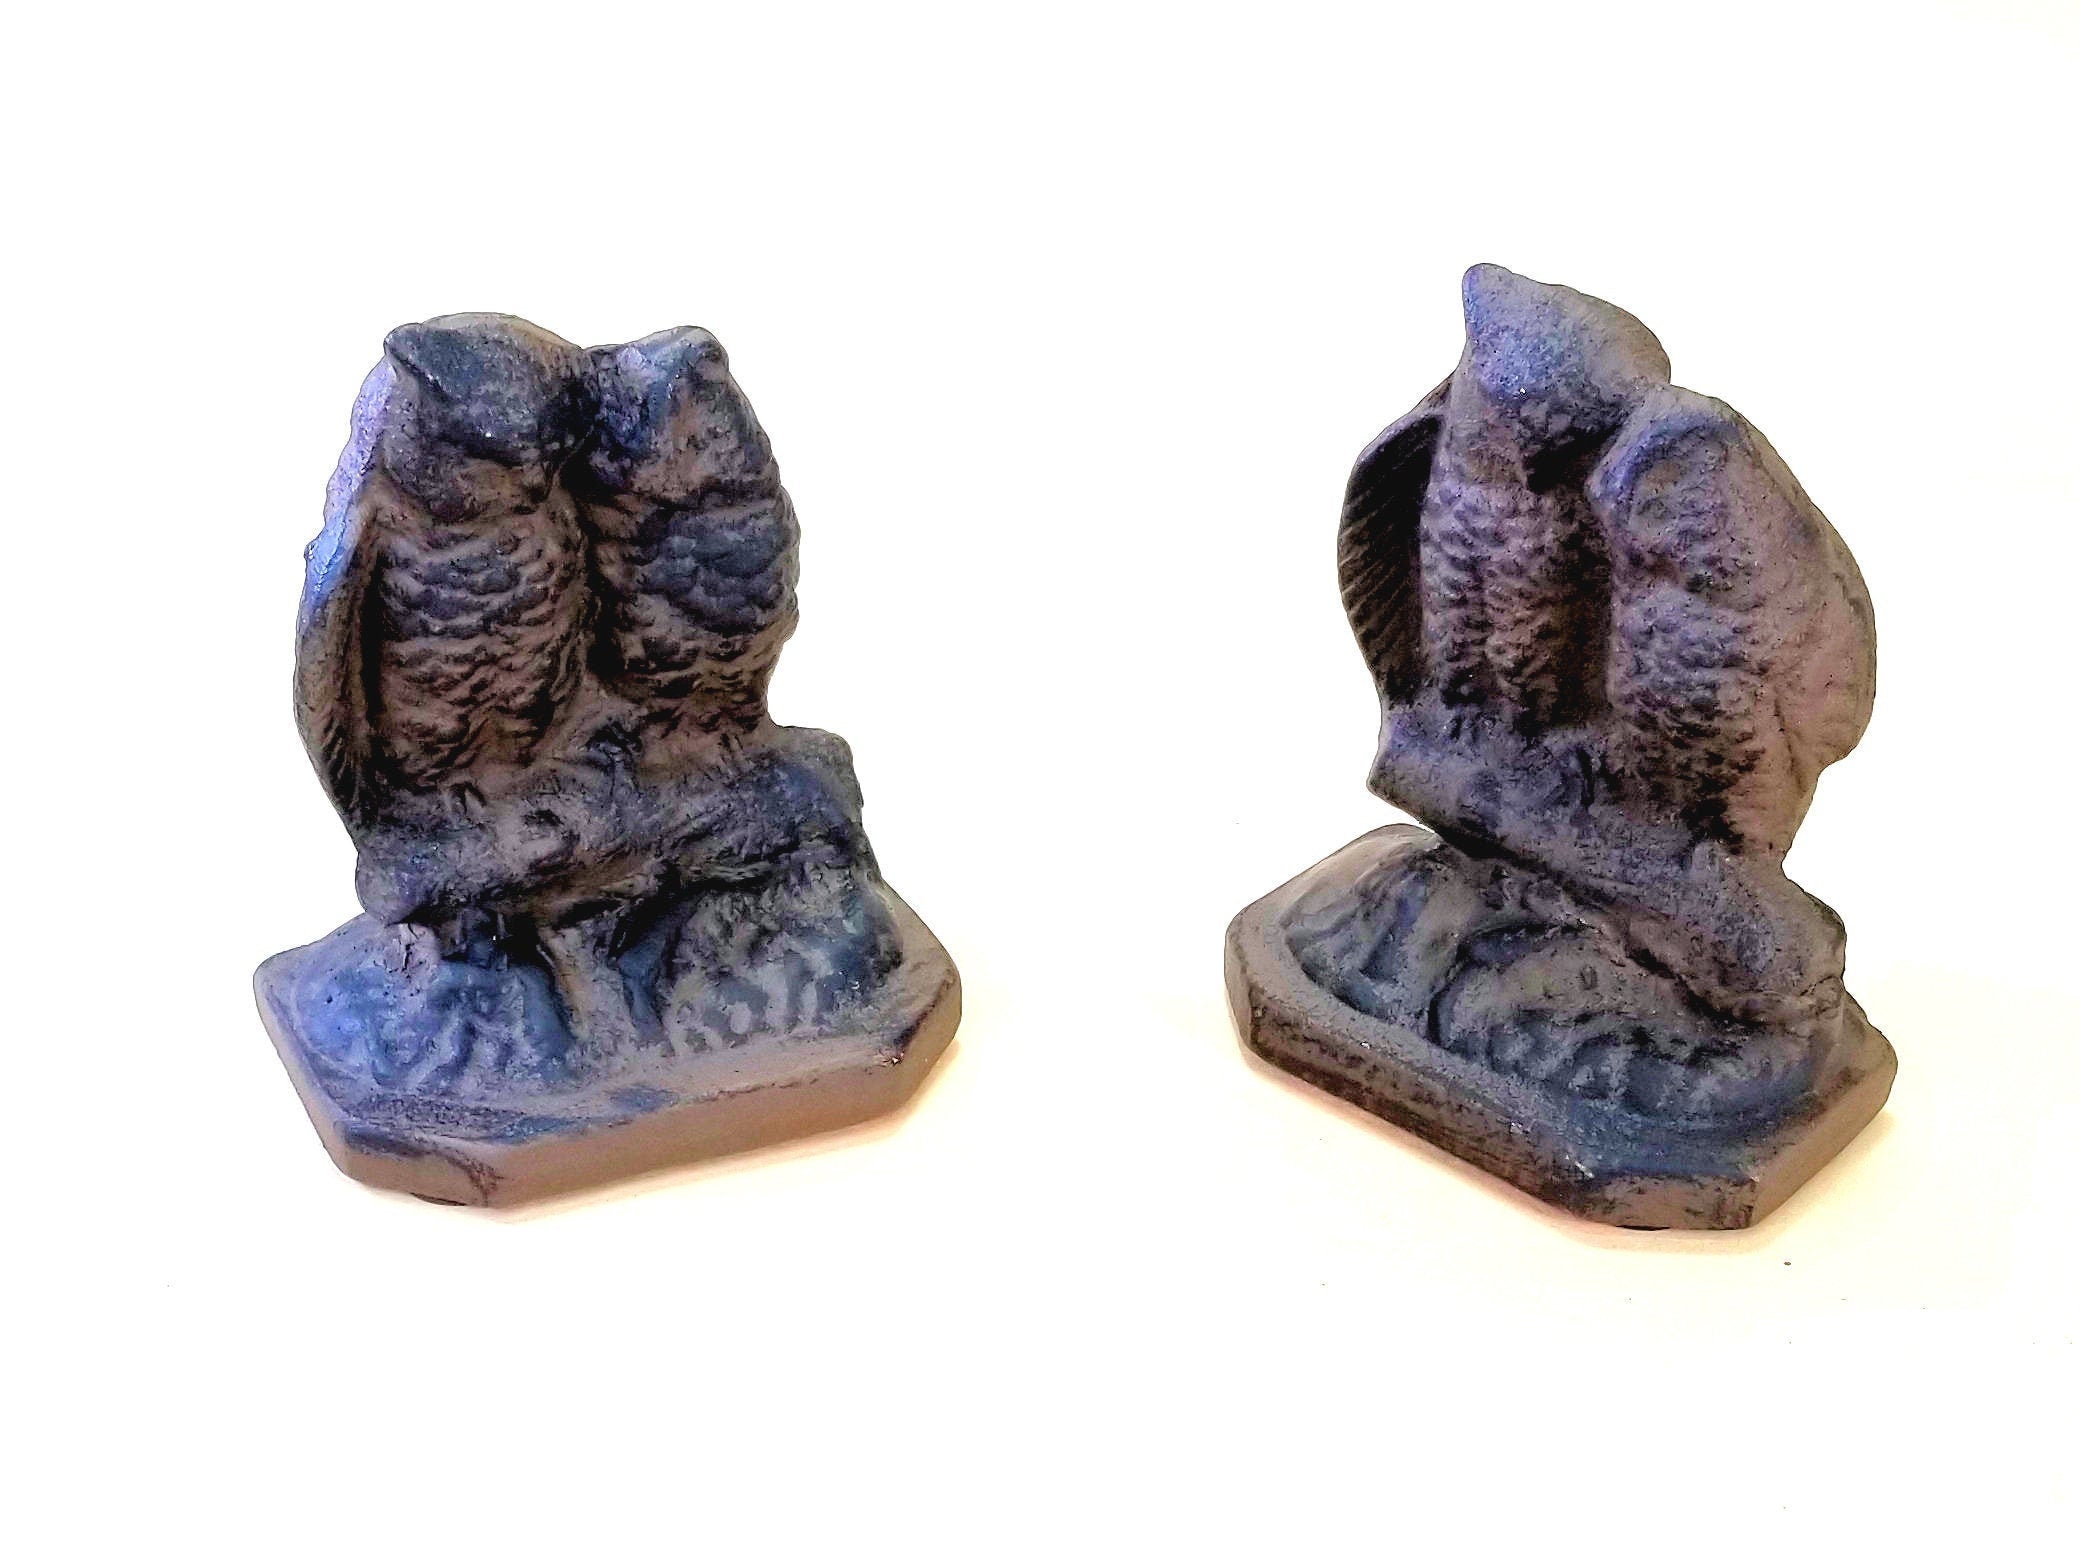 2 pc Cast Iron Owls Bookends Old Vintage Look Bookends Carvers Olde Iron 